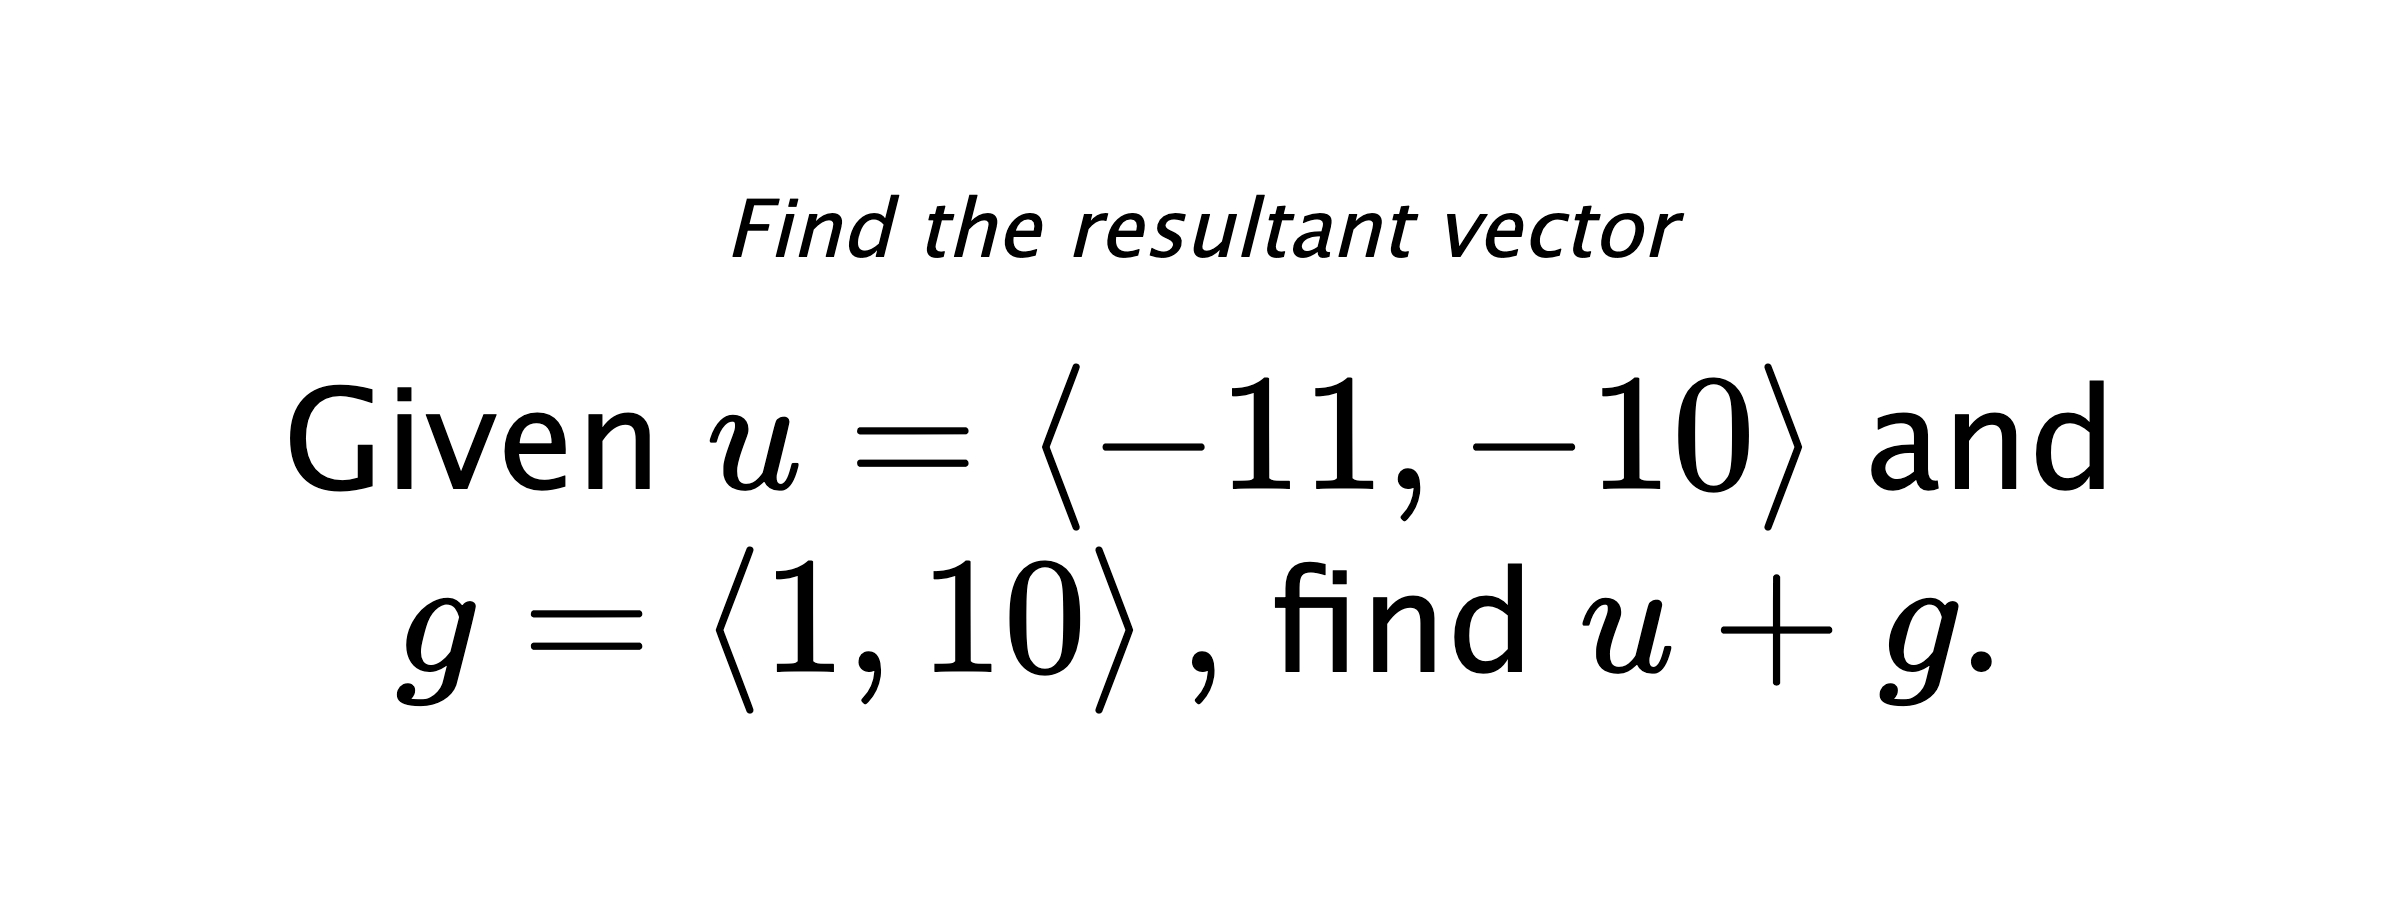 Find the resultant vector Given $ u = \left< -11,-10 \right> $ and $ g = \left< 1,10 \right> ,$ find $ u+g .$